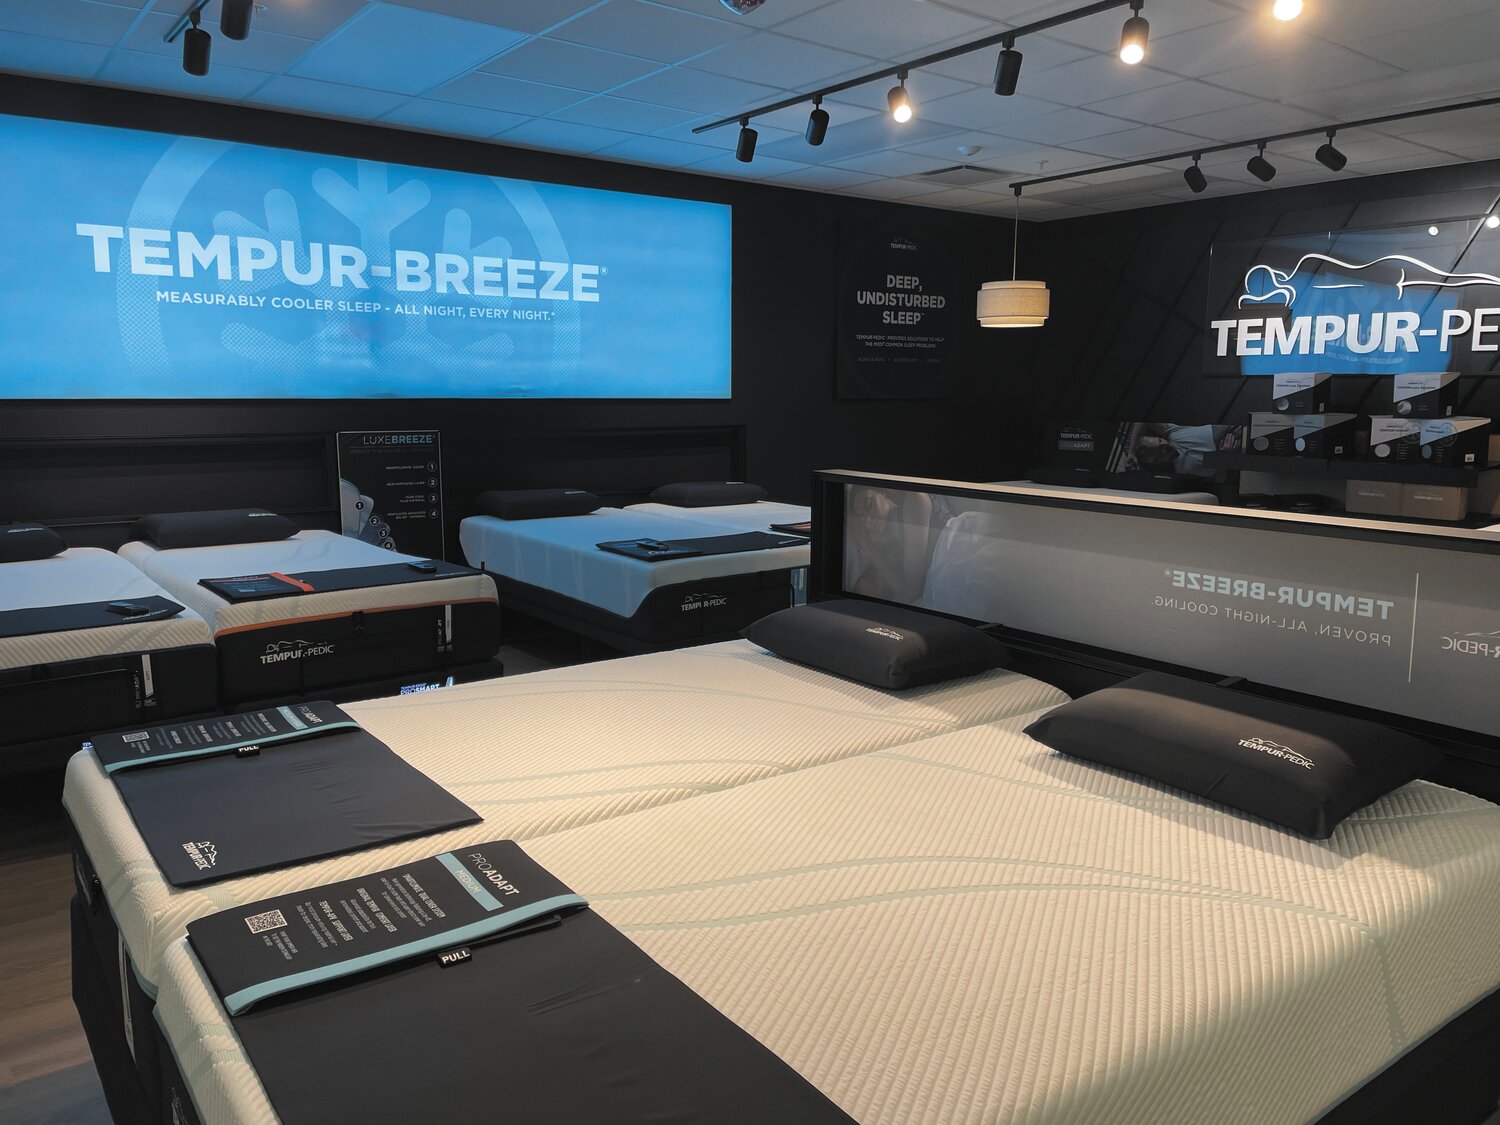 Tempur manufactures bedding products and components for brands including Tempur-Pedic and Stearns & Foster.